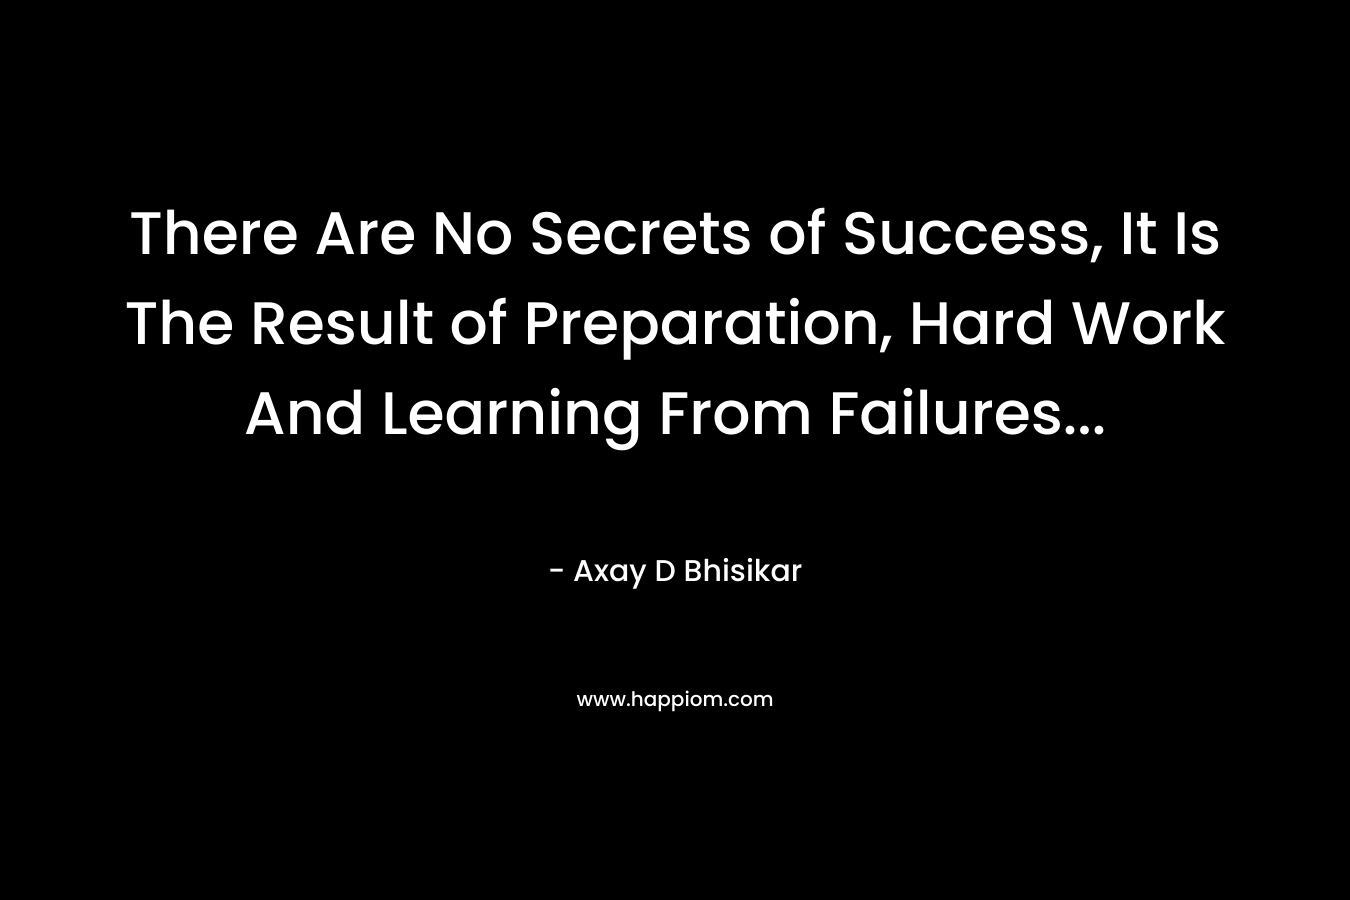 There Are No Secrets of Success, It Is The Result of Preparation, Hard Work And Learning From Failures...